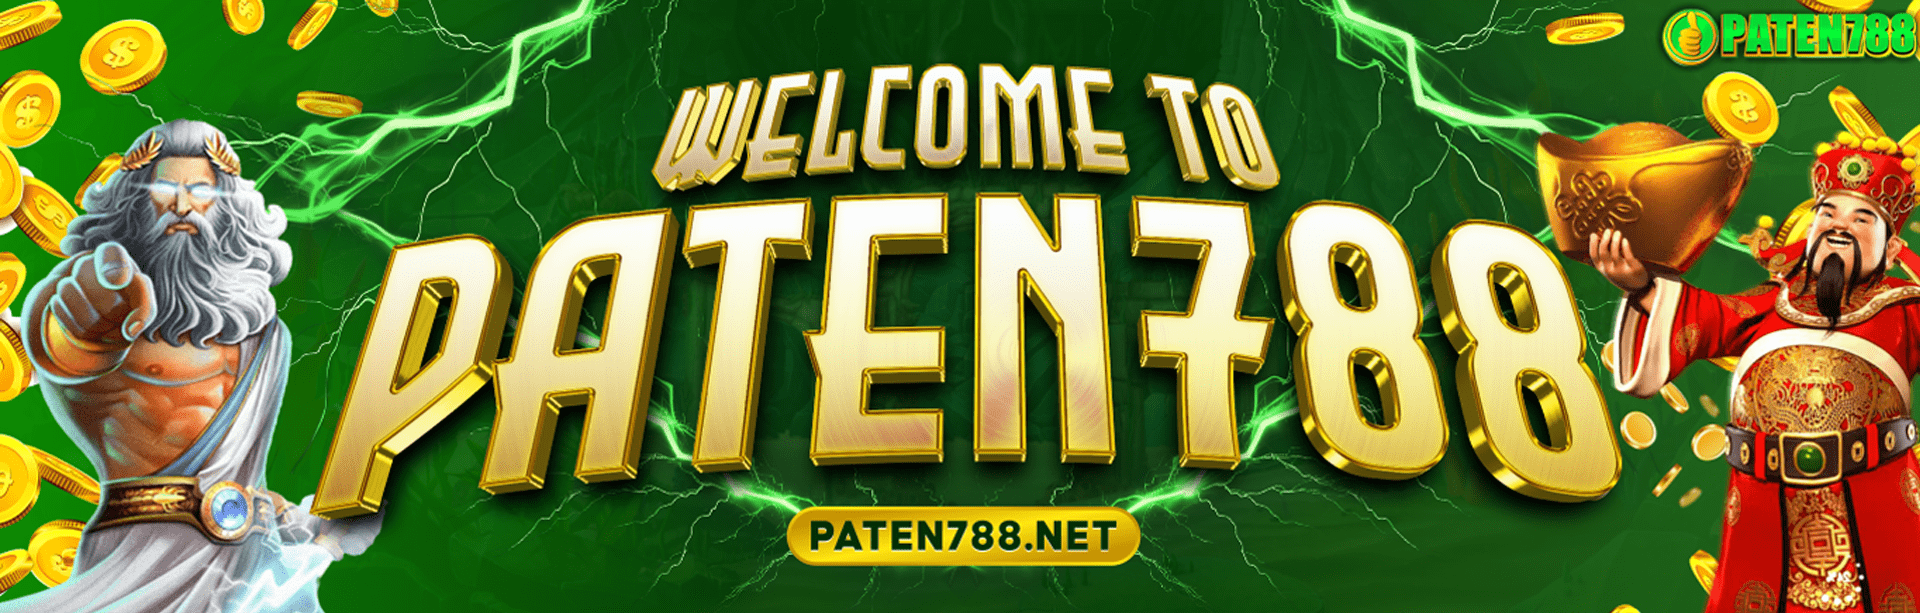 Welcome To PATEN788